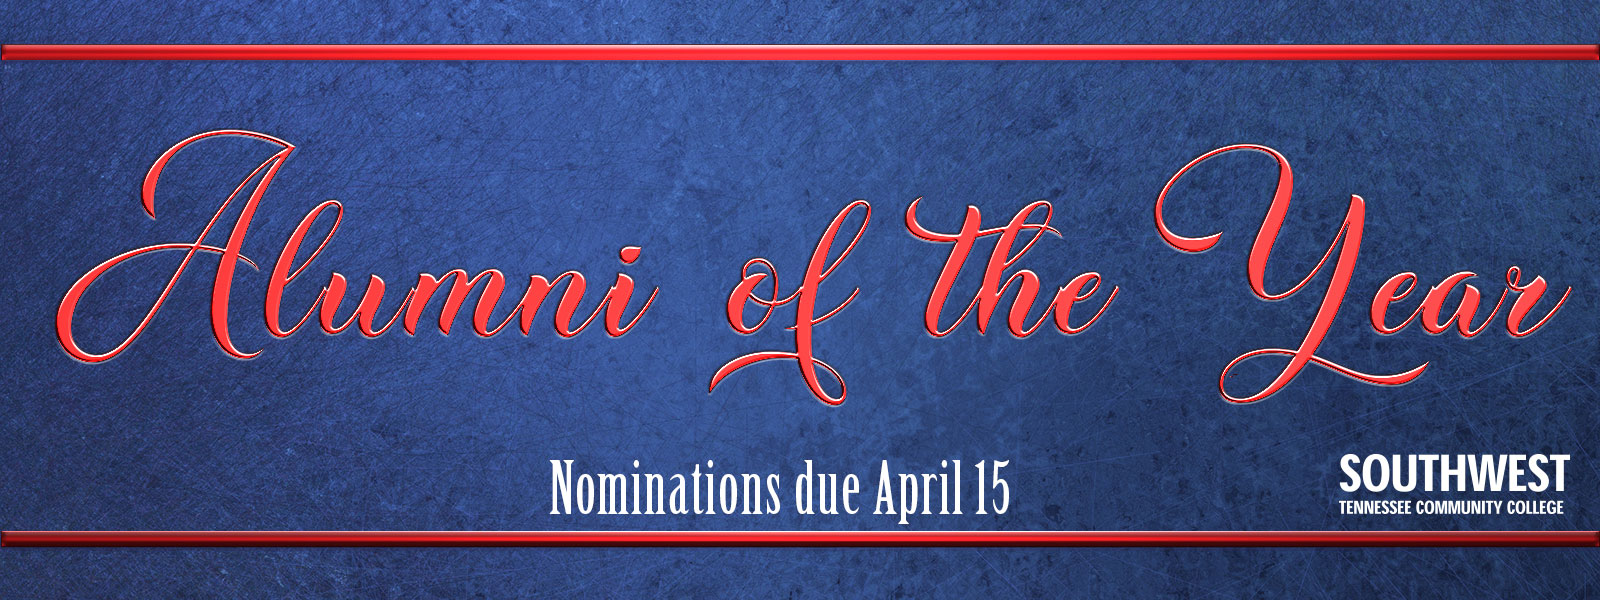 Southwest Alumni Association accepting nominations for Alumni of the Year